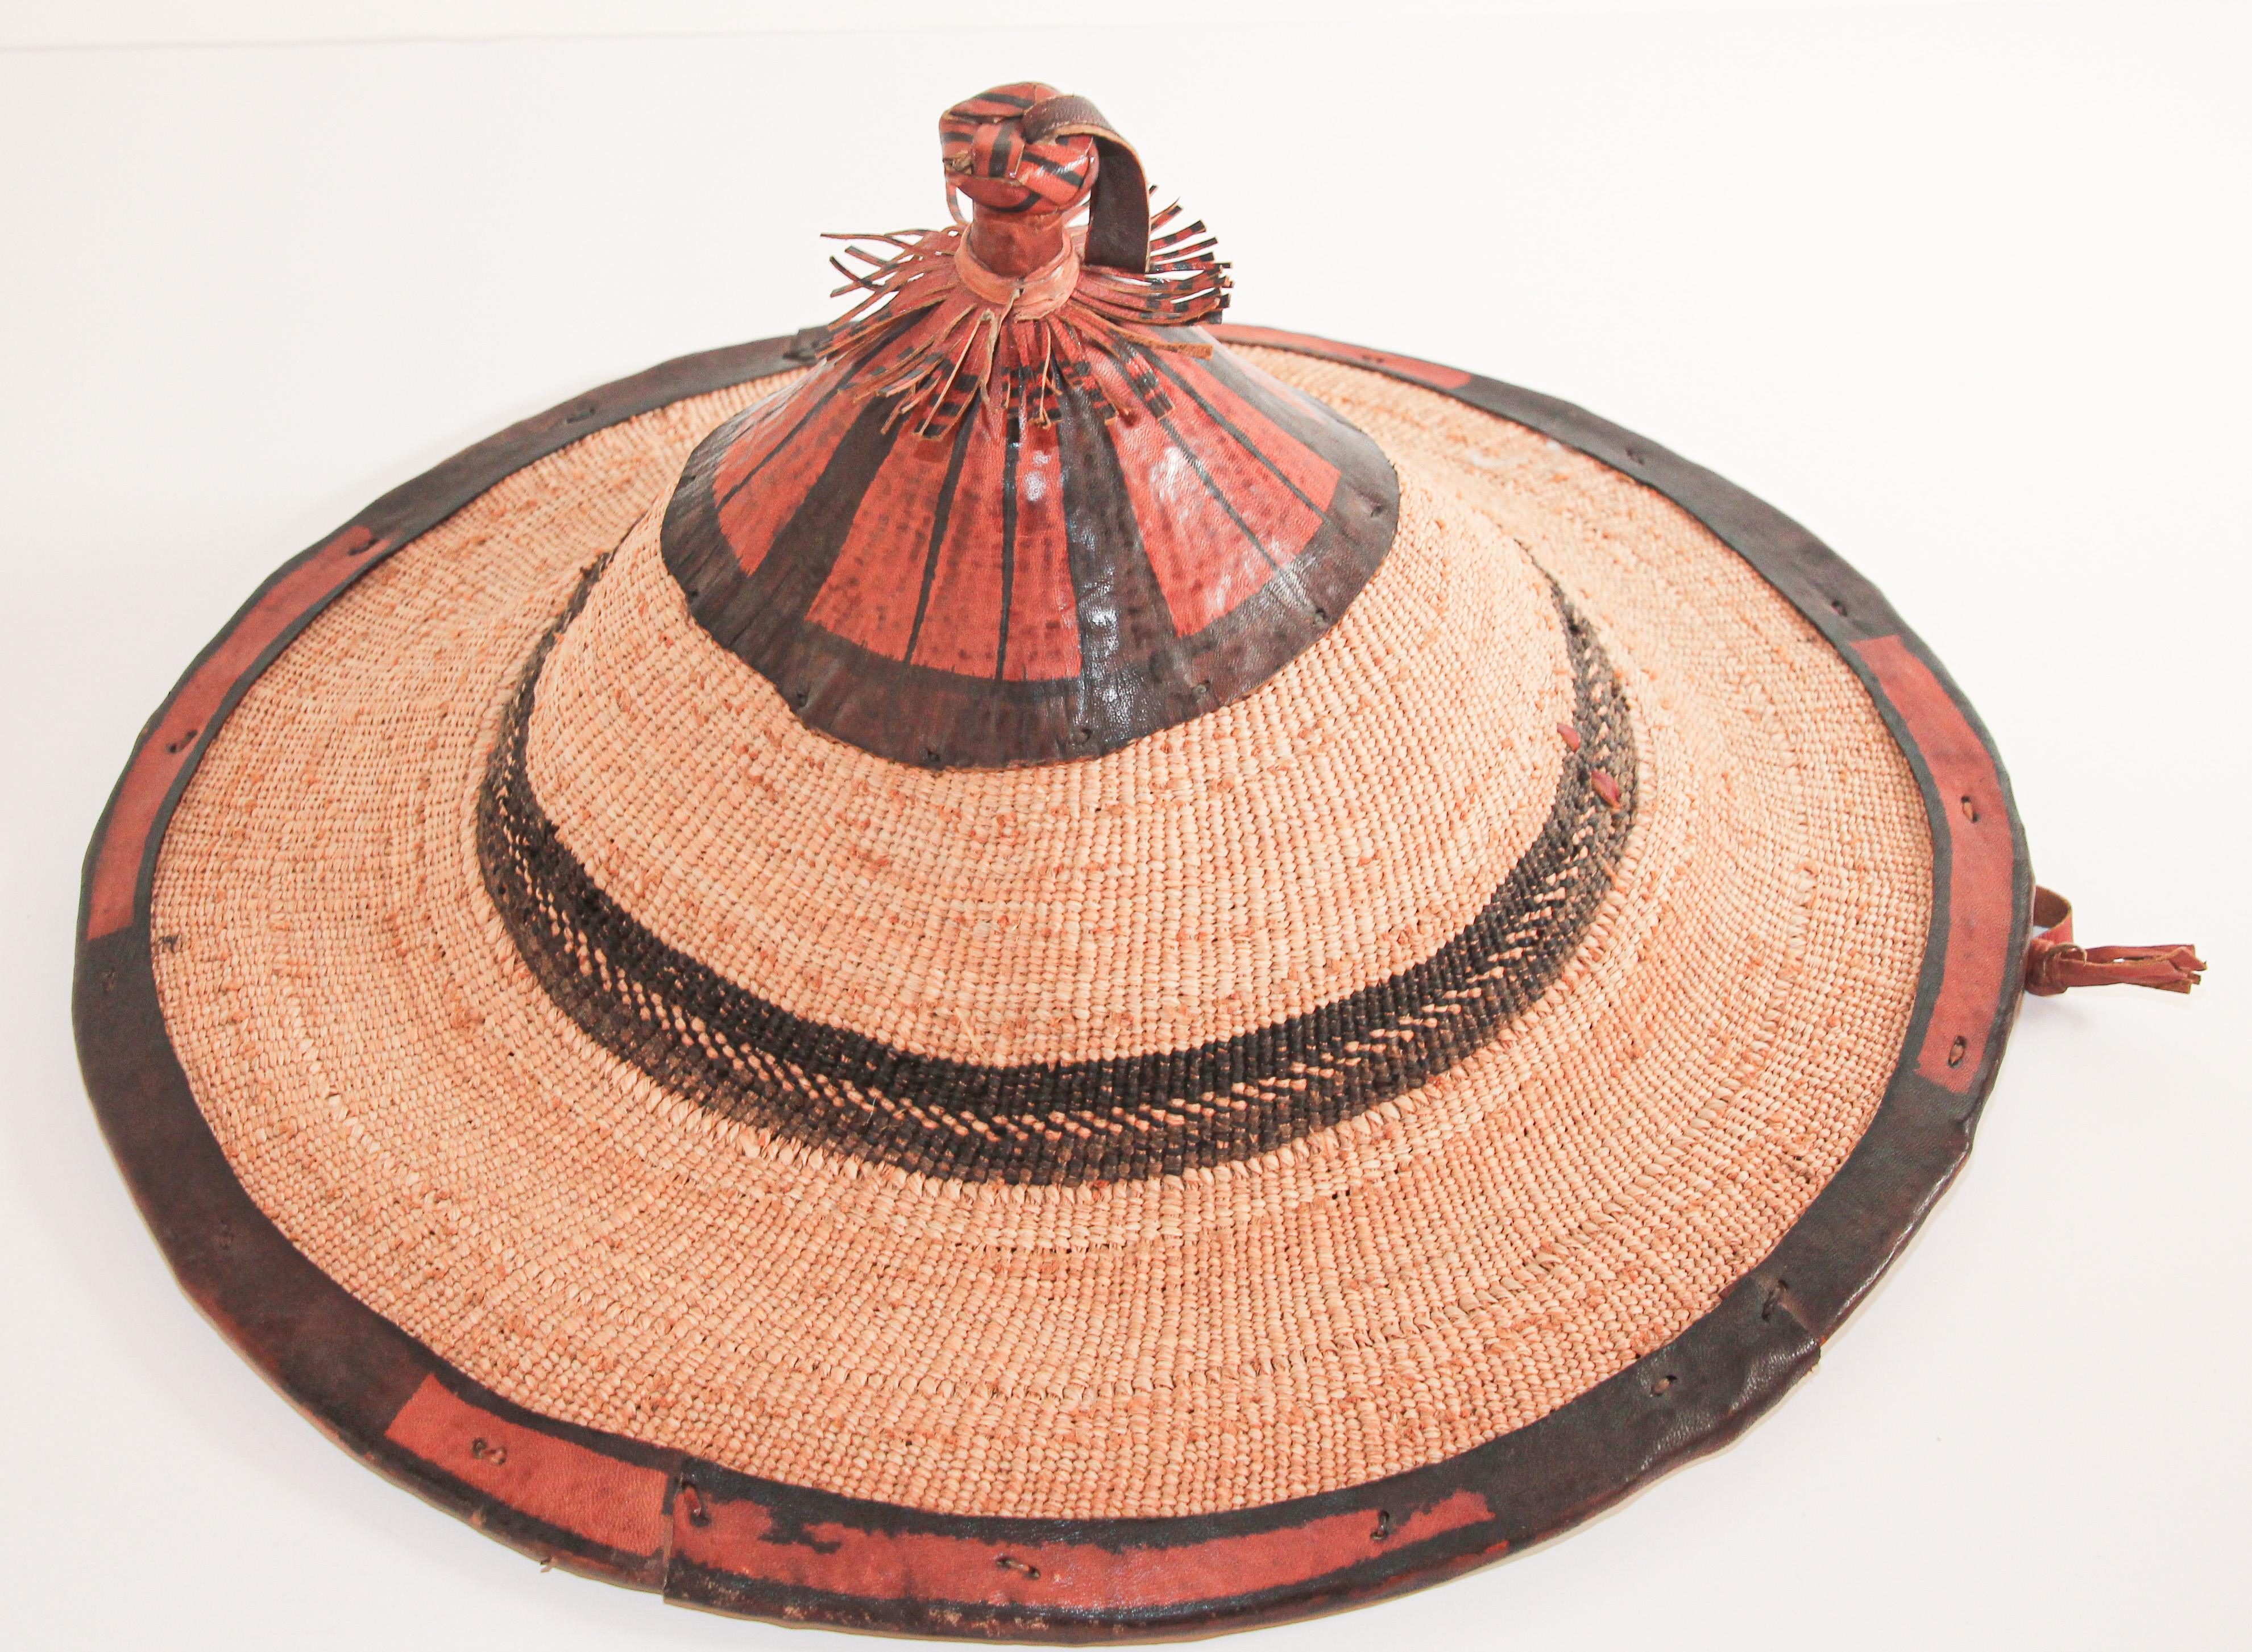 Mali West Africa Conical Leather and Straw Tribal Fulani Hat 8